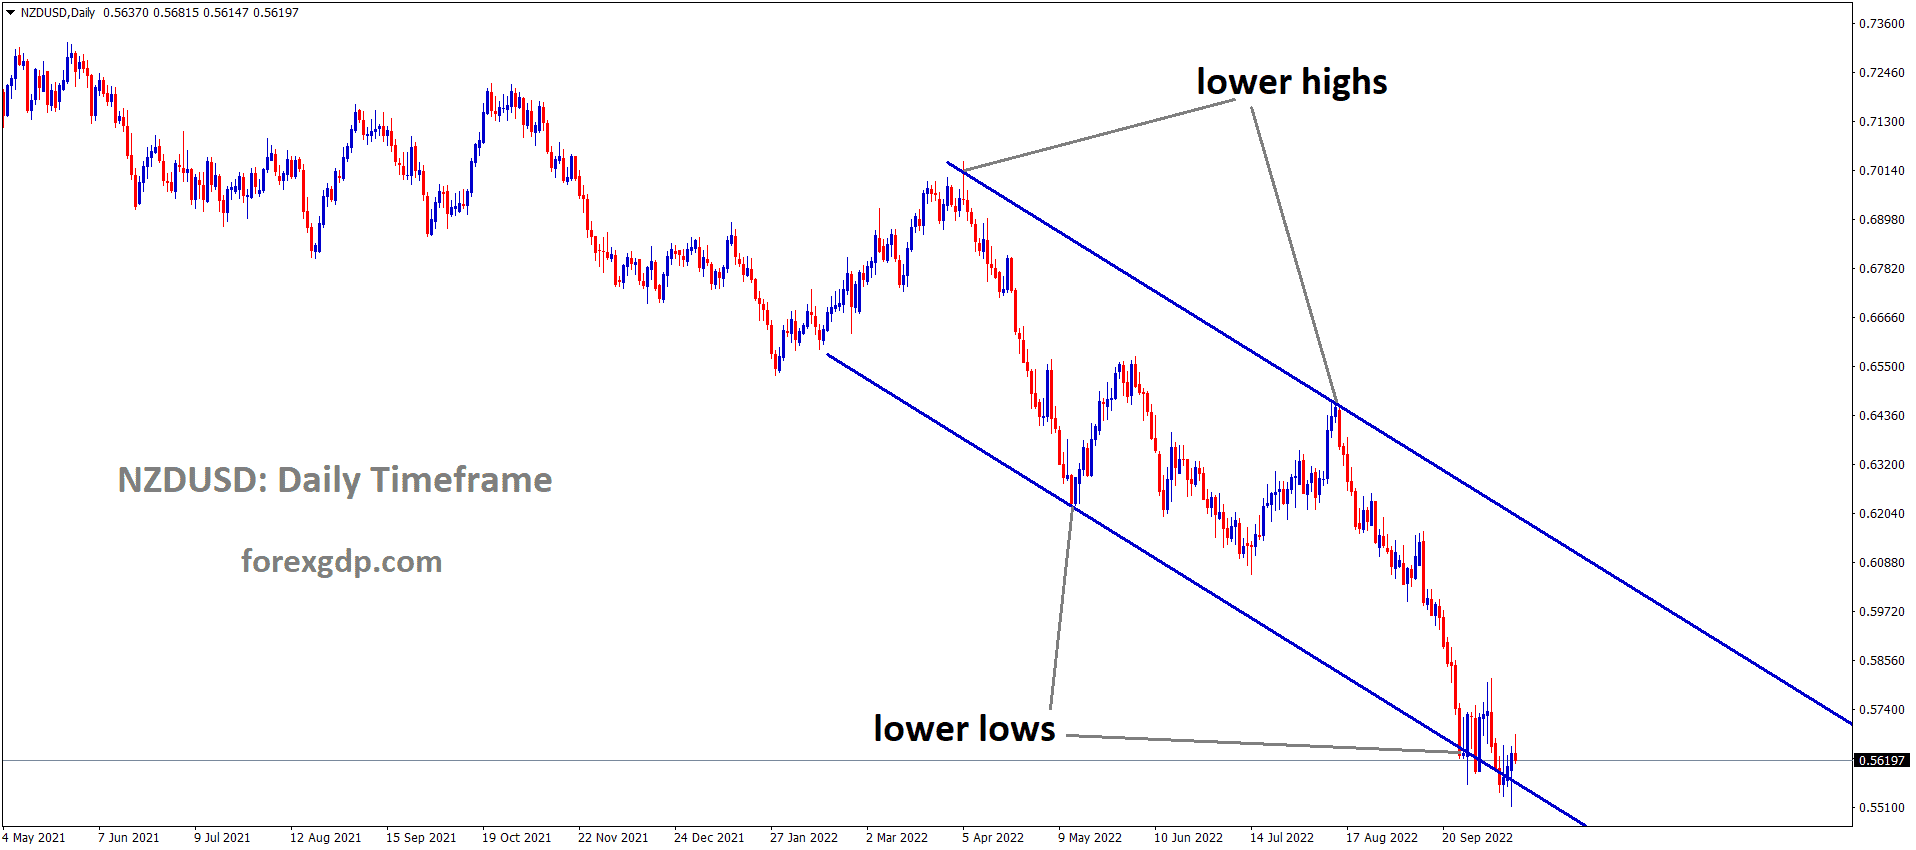 NZDUSD is moving in the Descending channel and the market has reached the Lower low area of the channel 1